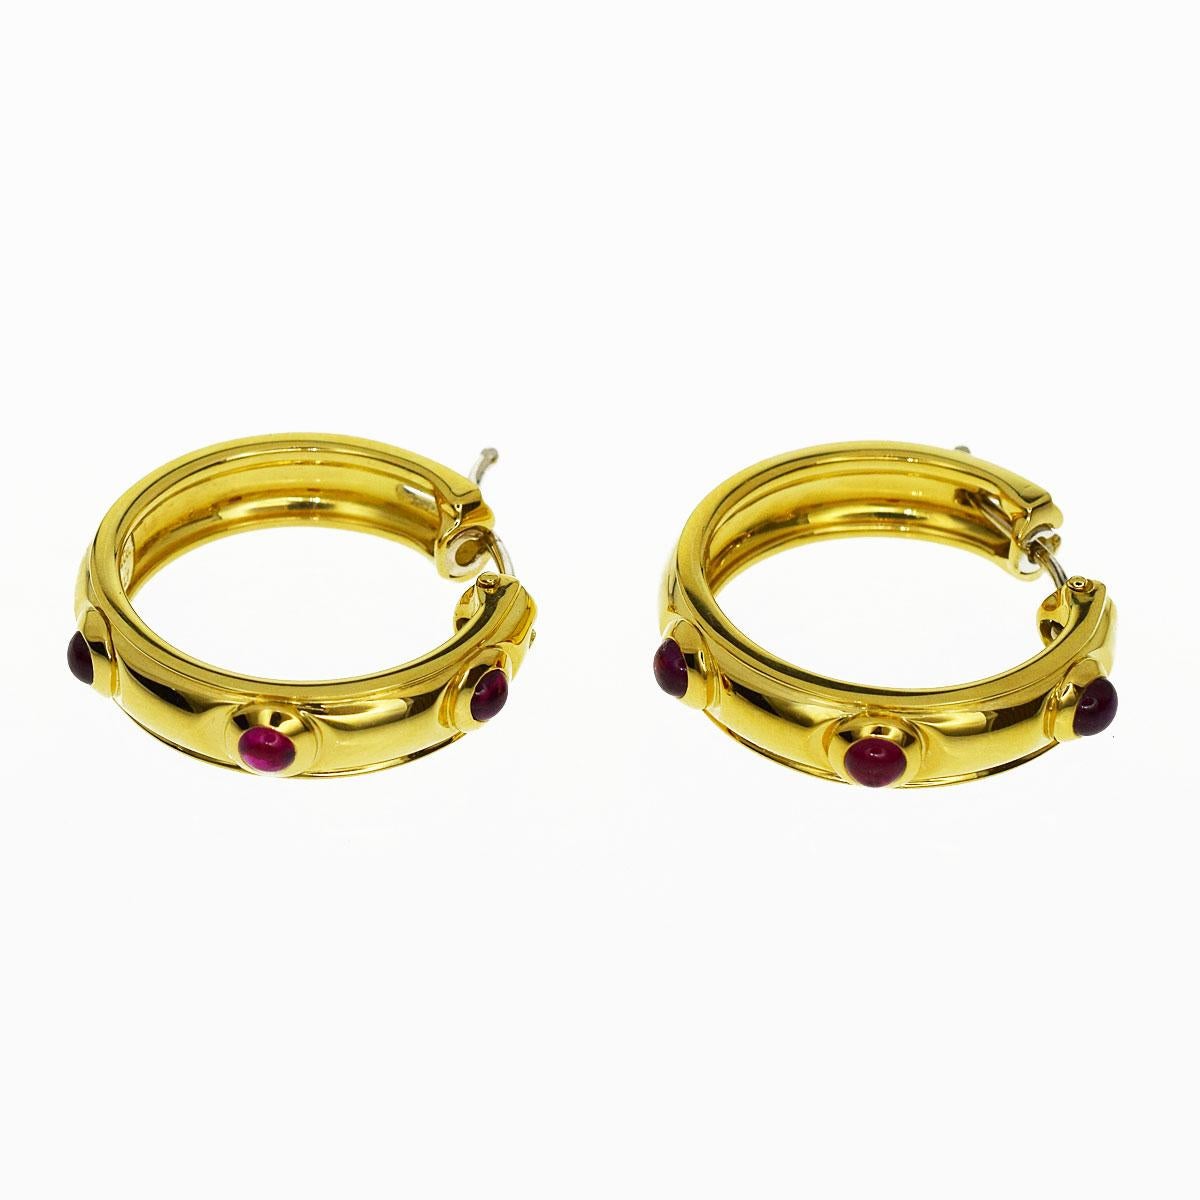 Brand:TIFFANY&Co.
Name:Ruby Gold Studs Earrings
Material: 6P ruby, 750 K18 YG Yellow Gold
Weight: 11.6g (Pair)
Size:H22.82mm×W5.23mm / 0.89